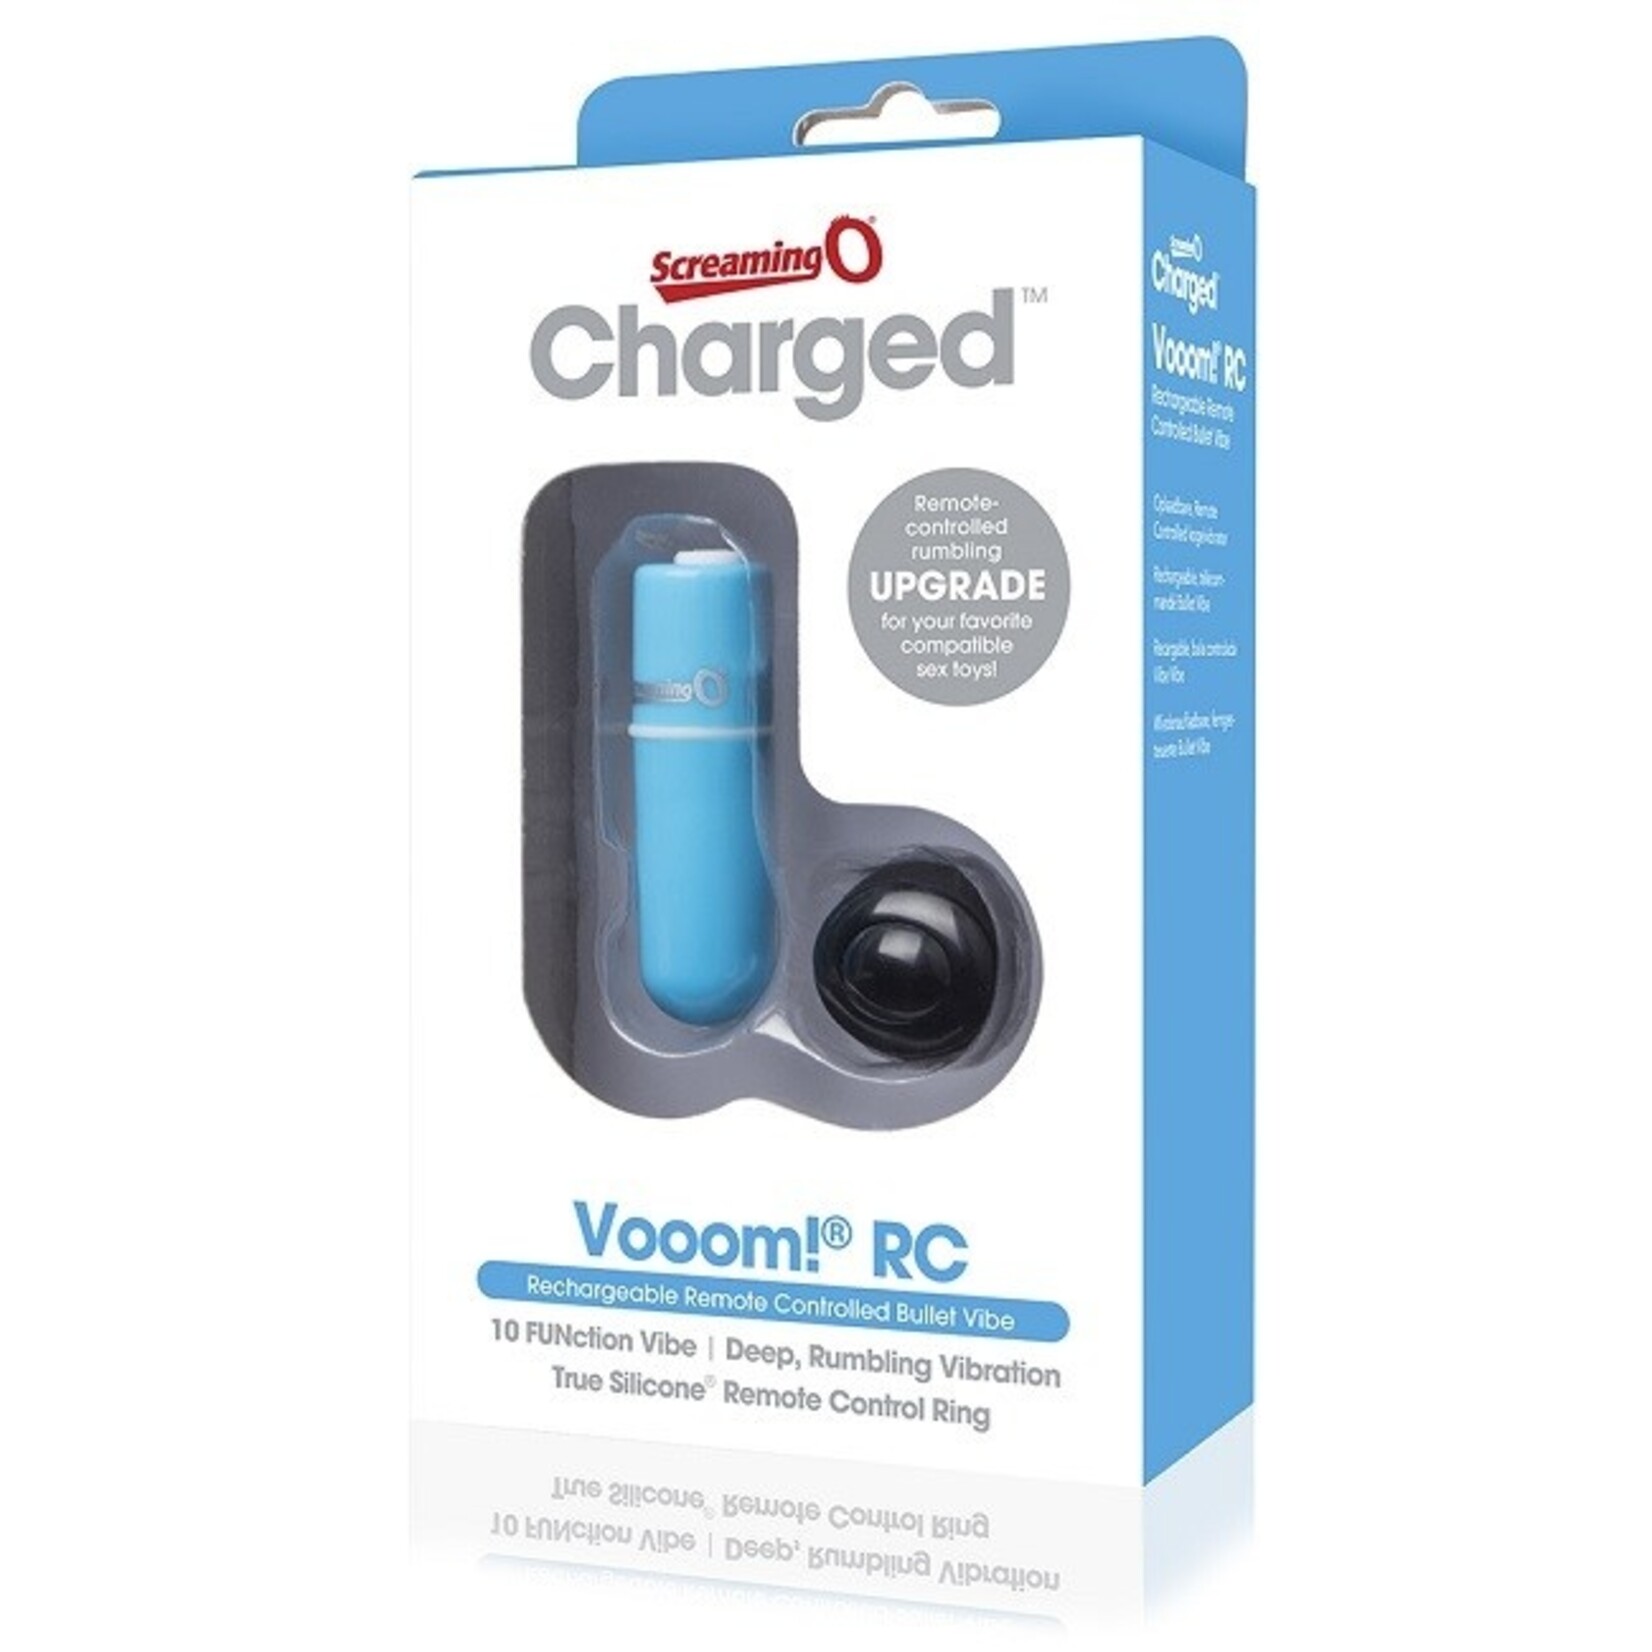 Screaming O Screaming O - Charged Vooom Remote Bullet